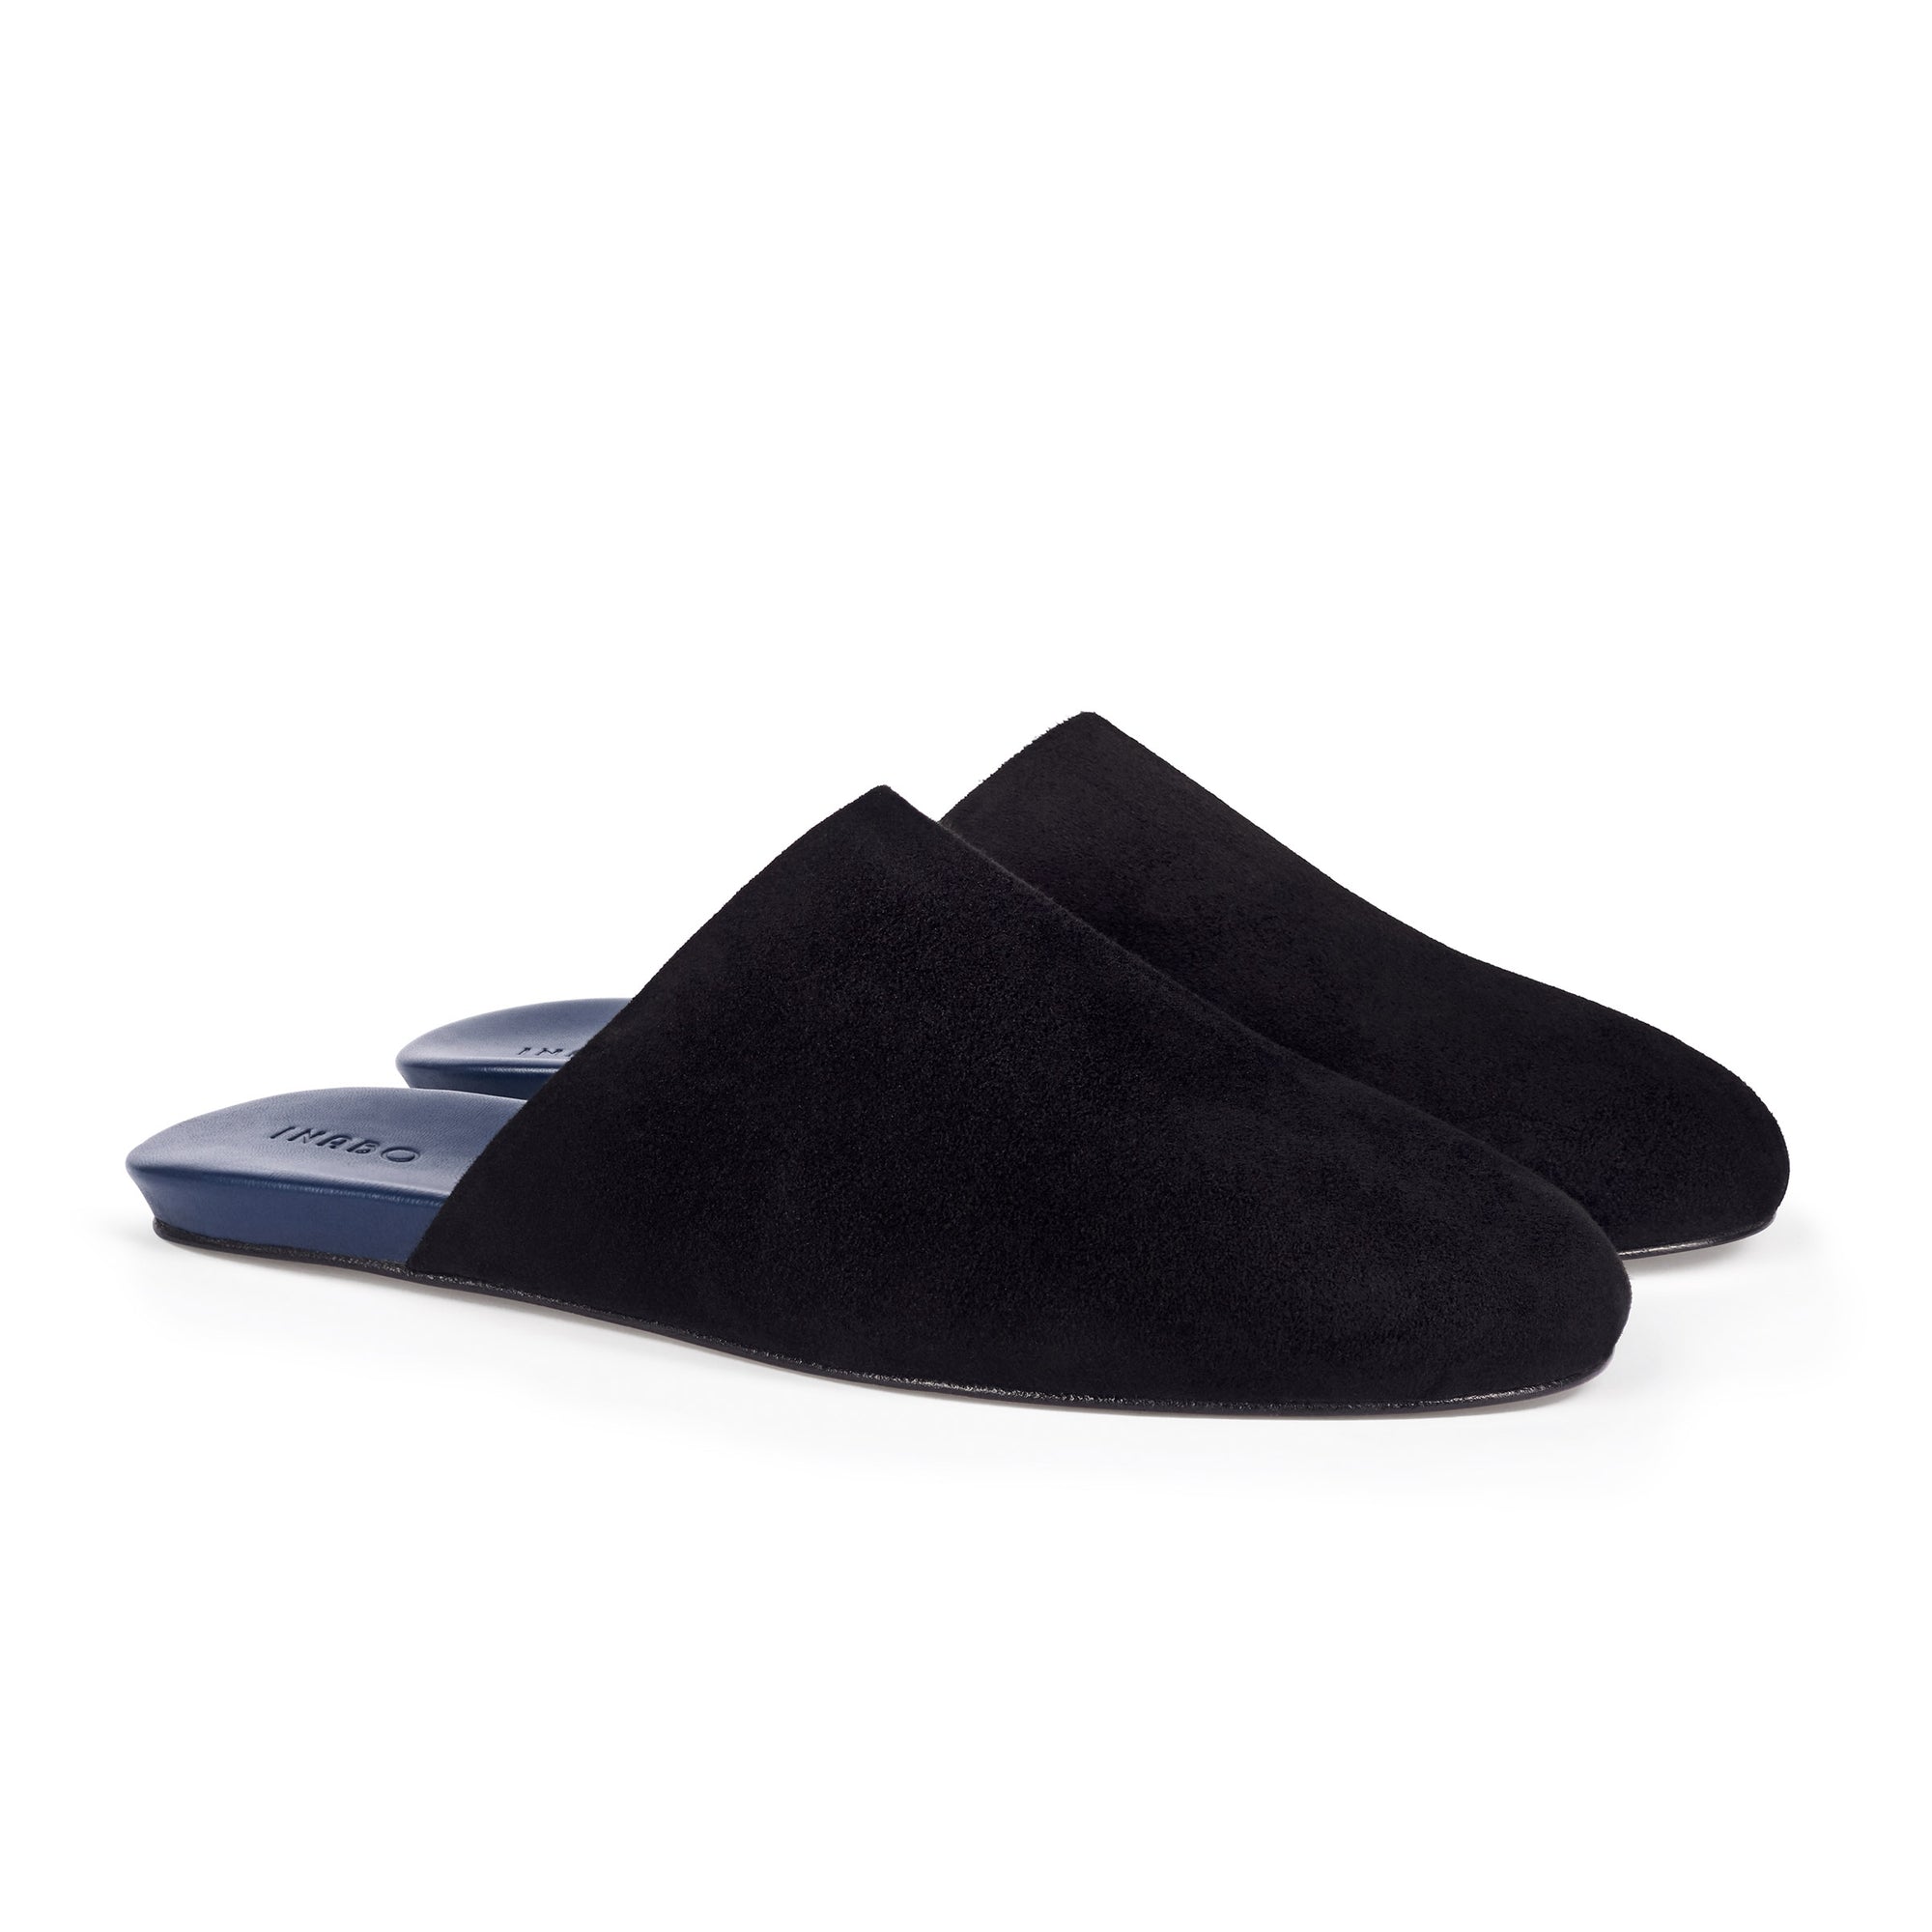 Inabo Men's Slider slippers in black suede and leather outer sole